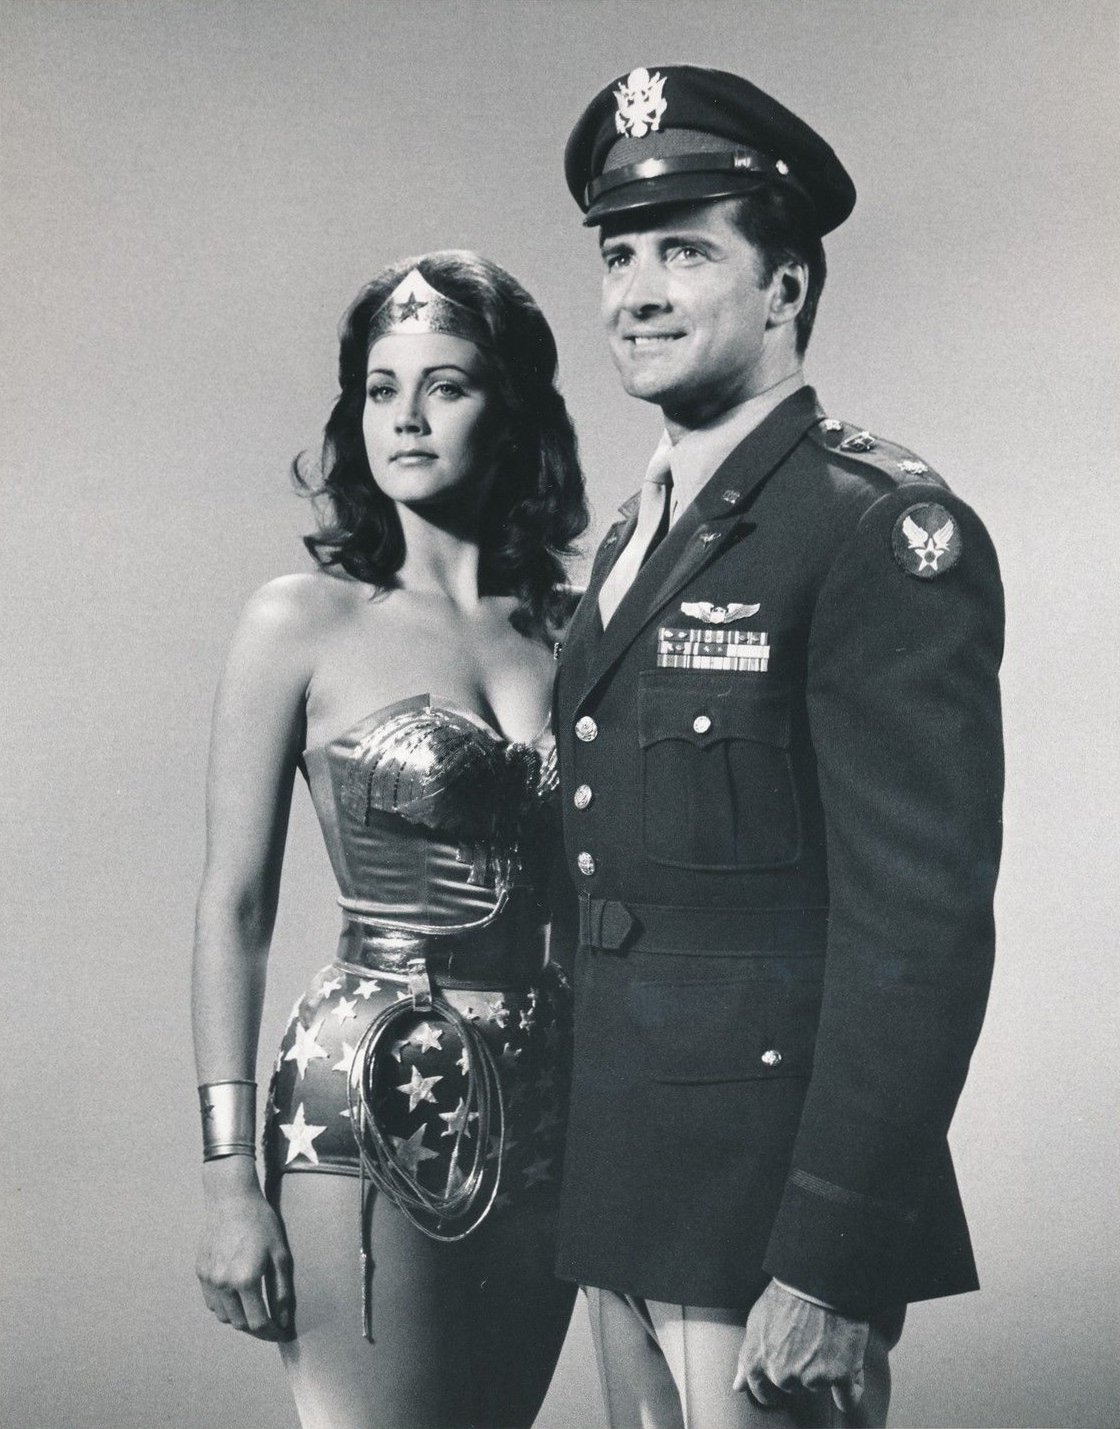 Lynda Carter and Lyle Waggoner star in "Fausta: The Nazi Wonder Woman" circa 1976 | Source: Wikimedia Commons